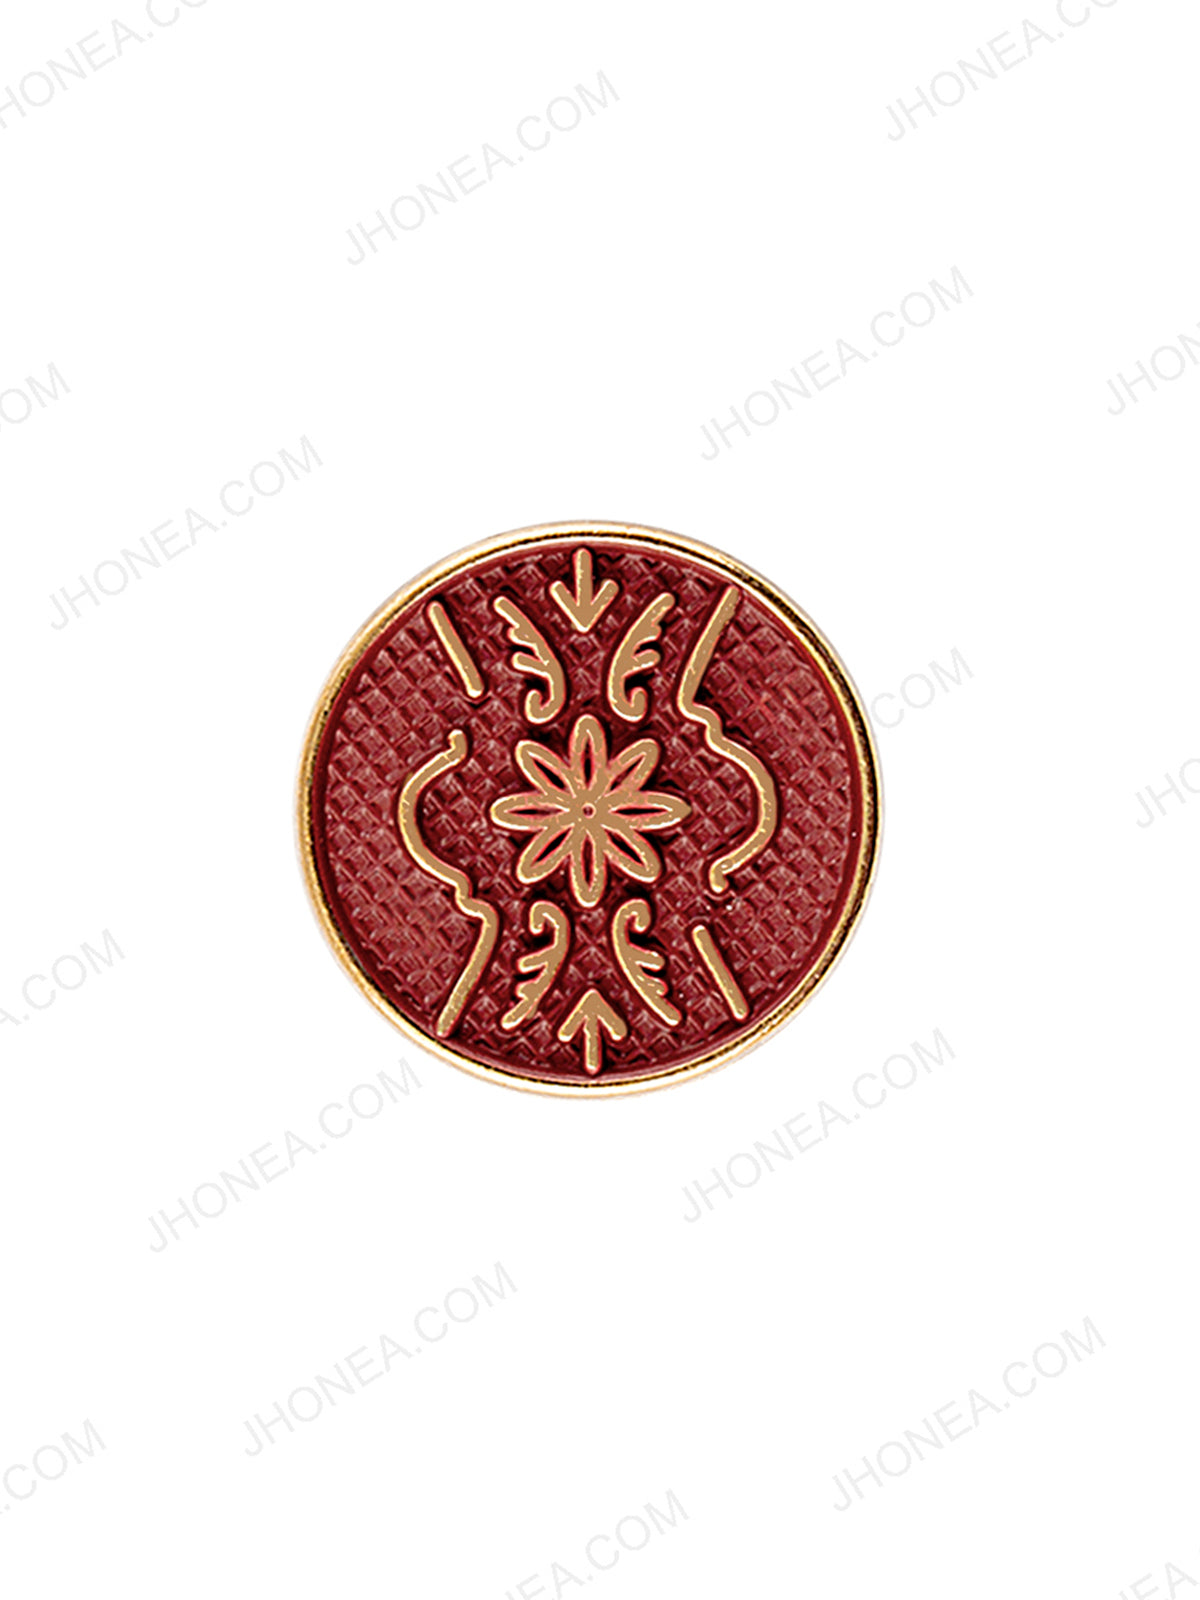 Golden with Maroon Matte Gold Engraved Design Coat Button